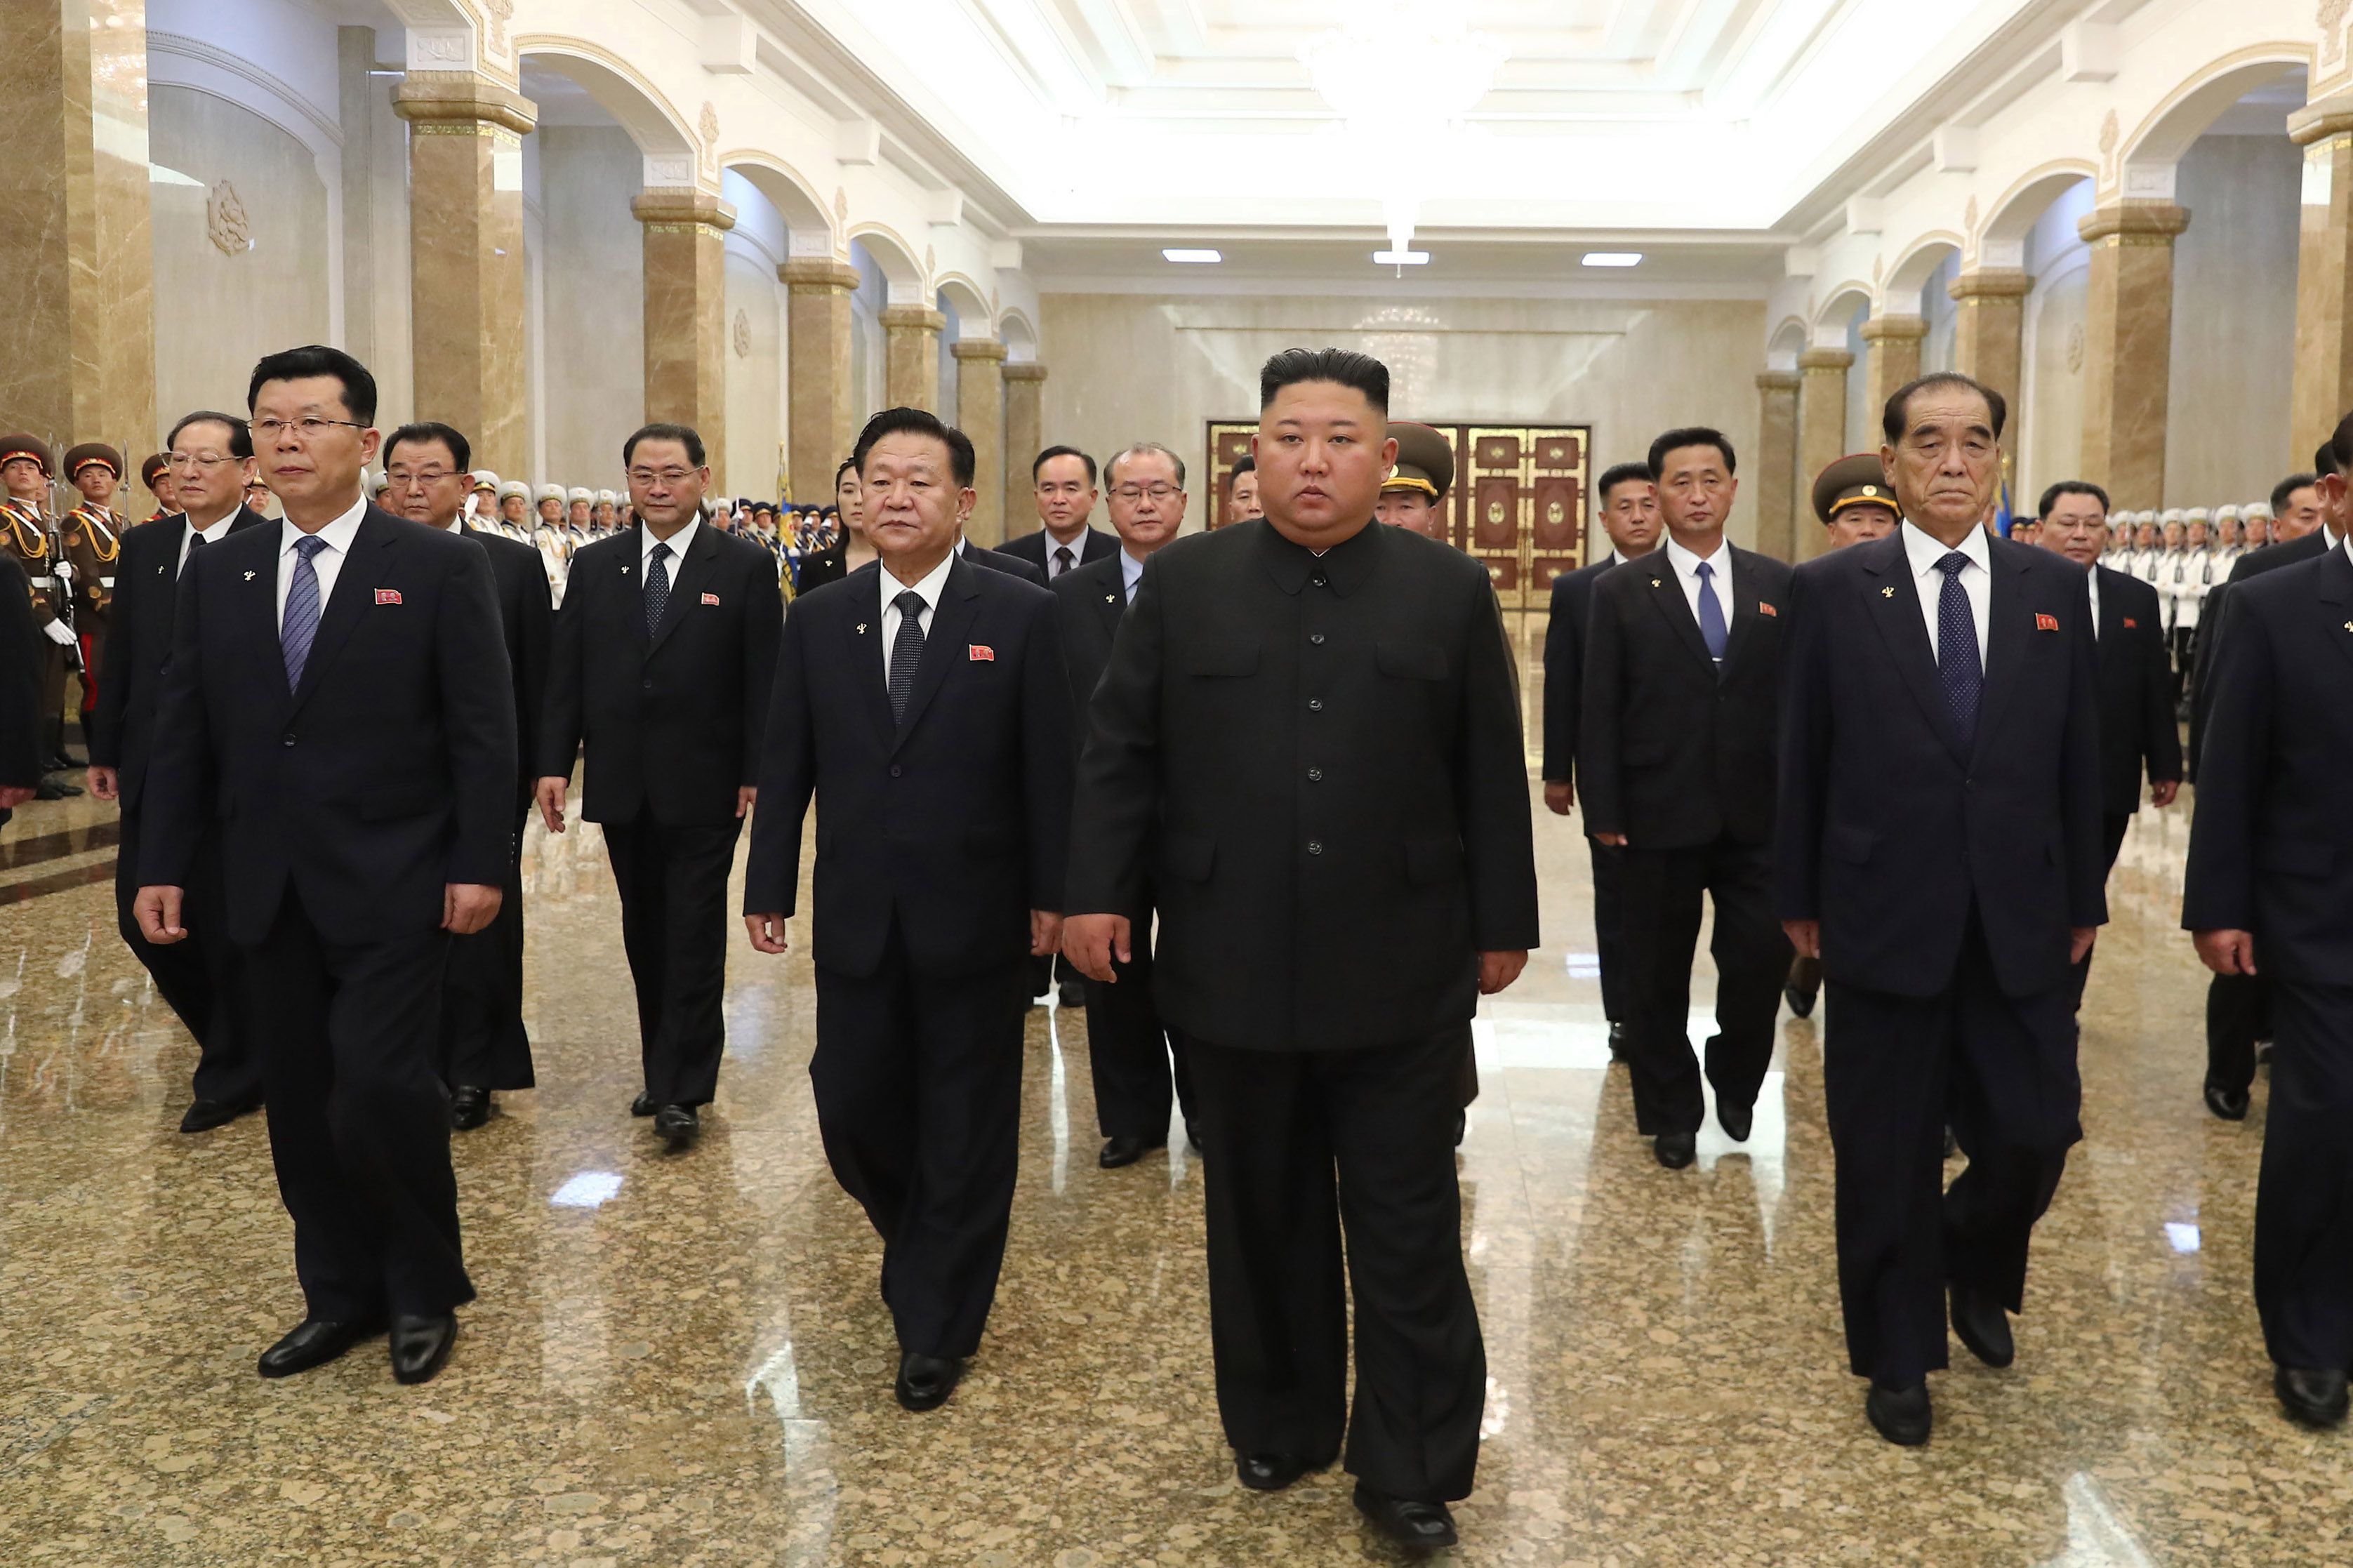 07/07/2020 07 July 2020, North Korea, Pyongyang: North Korean leader Kim Jong-un (C) visits the Kumsusan Palace of the Sun in Pyongyang to pay tribute to his grandfather and North Korea's founder, Kim Il-sung, on the occasion of the 26th anniversary of the former leader's death. Photo: -/YNA/dpa POLITICA INTERNACIONAL -/YNA/dpa 